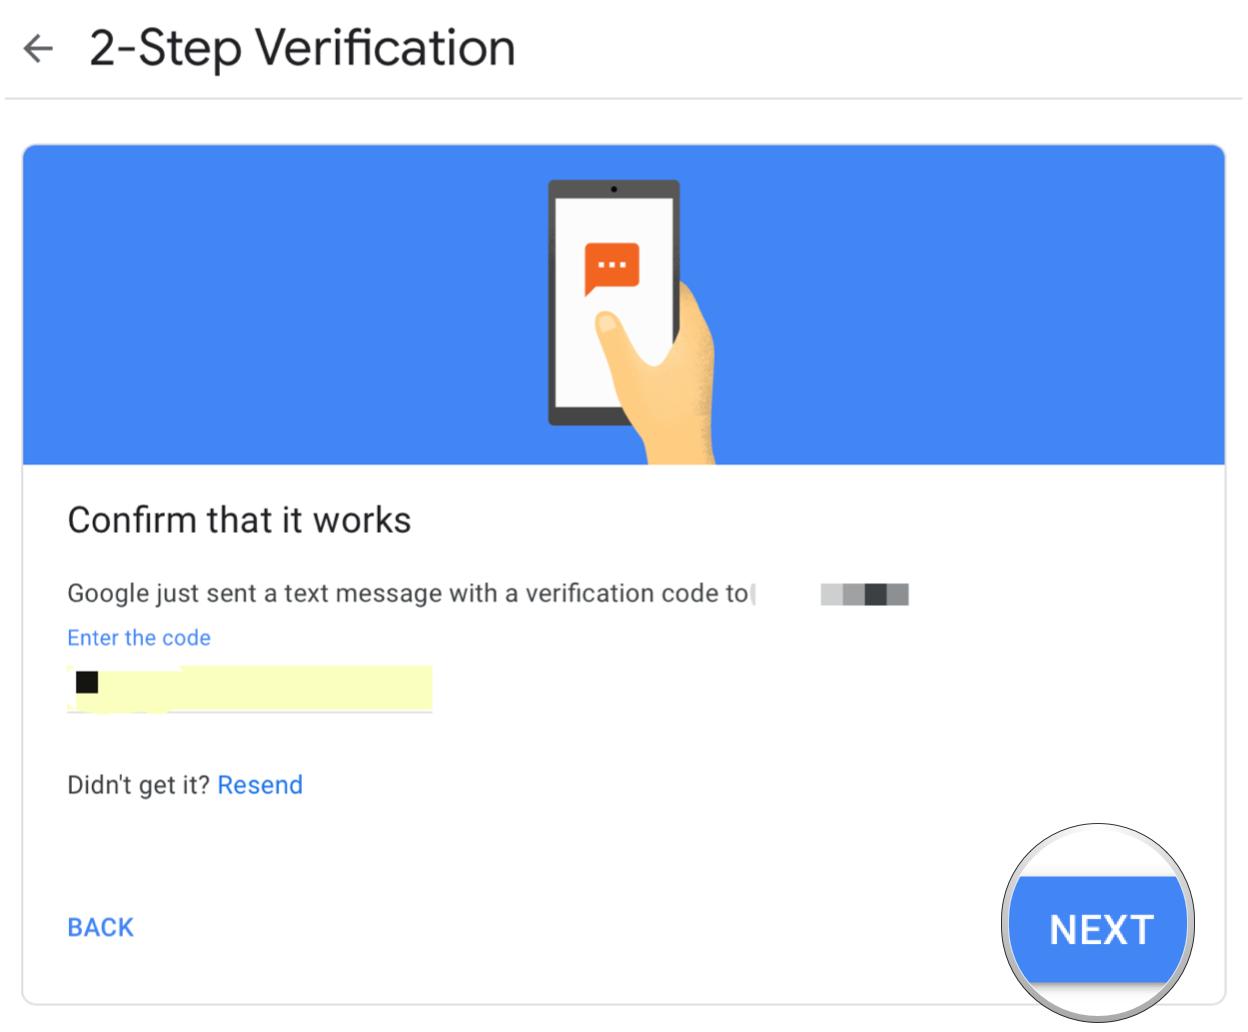 Set up Google account 2-factor authentication by showing steps: input your six digit verification code from the text, and then click Next